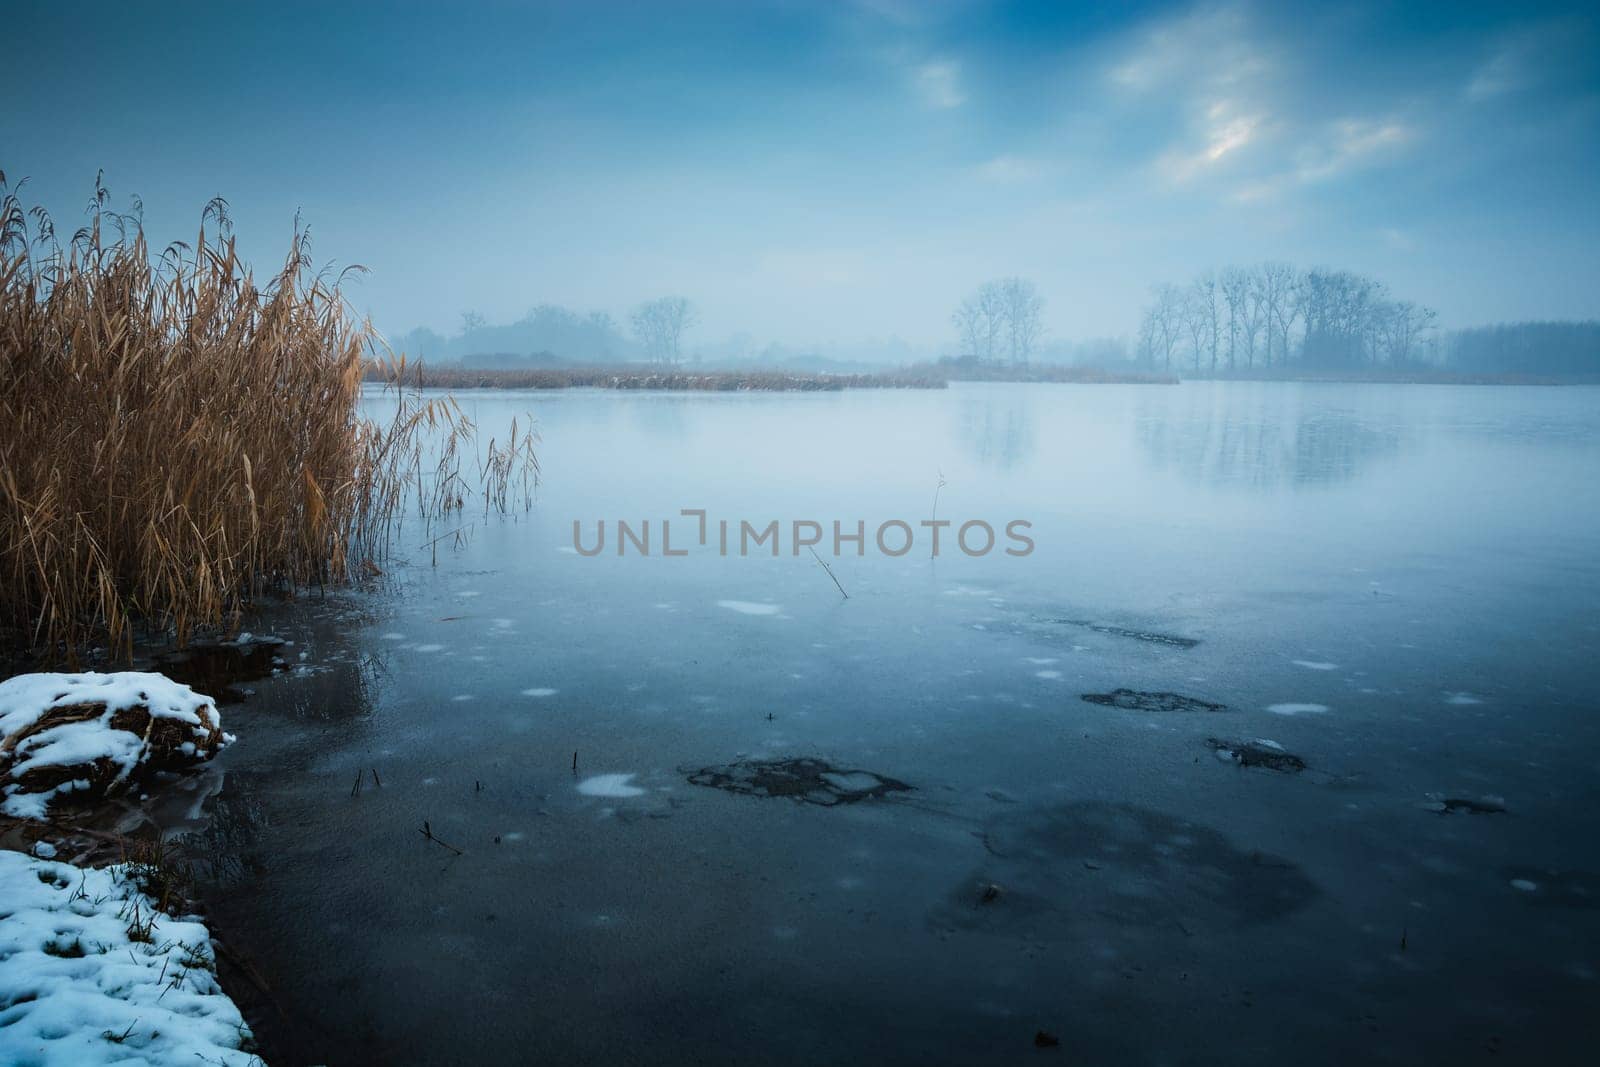 Winter landscape with a view of the shore of a frozen lake on a foggy day, Stankow, eastern Poland